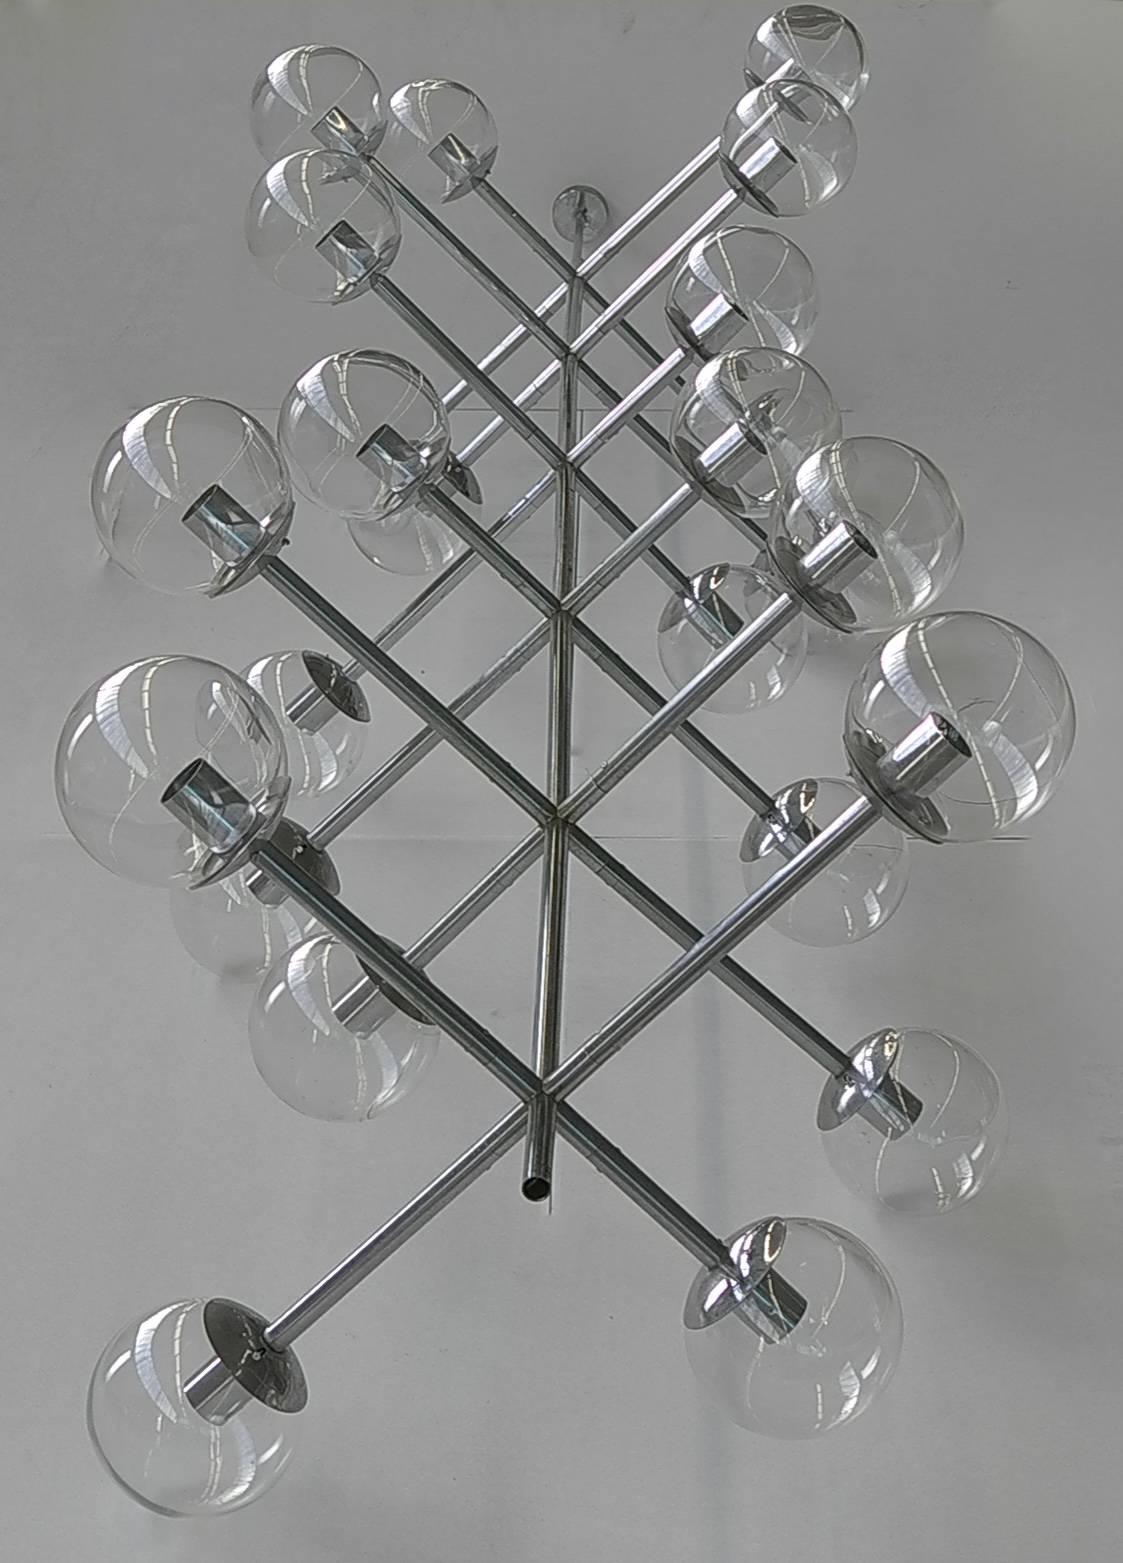 Extra Large Chrome and glass Ball lamp, 1960's
This lamp can also be split up into a pair of lamps.
24 transparant glass balls in total.